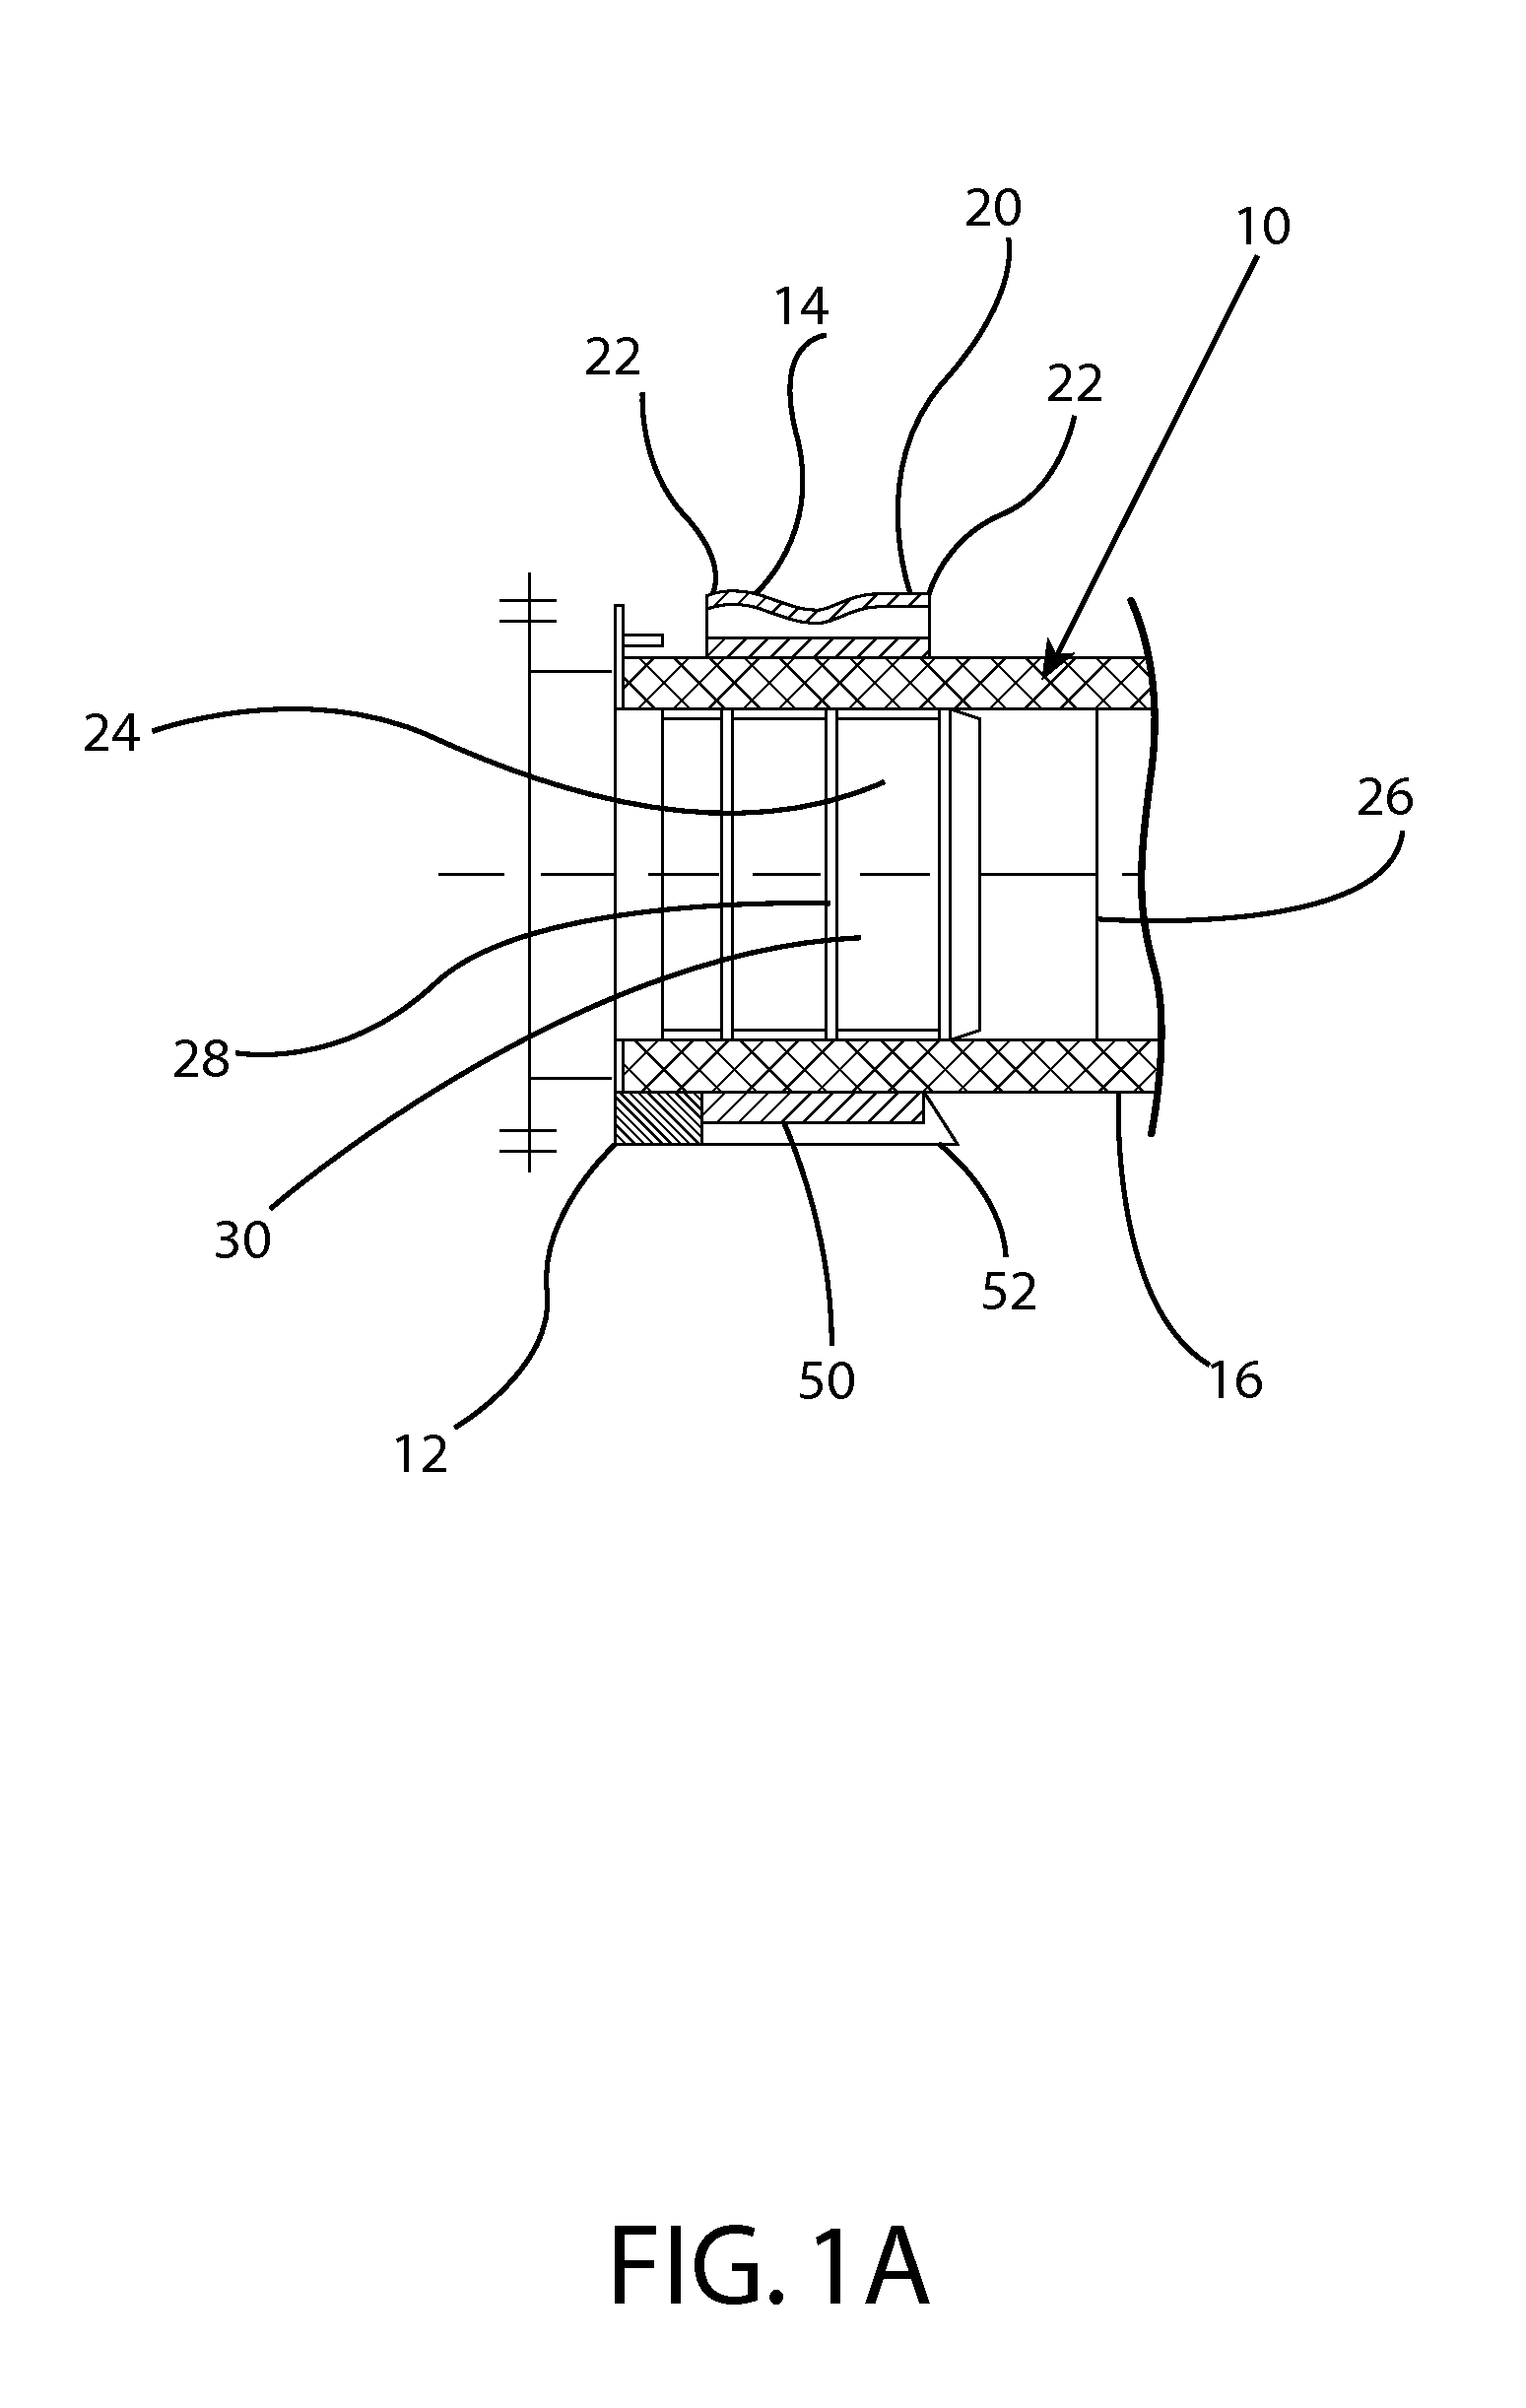 Method and apparatus for connecting piping